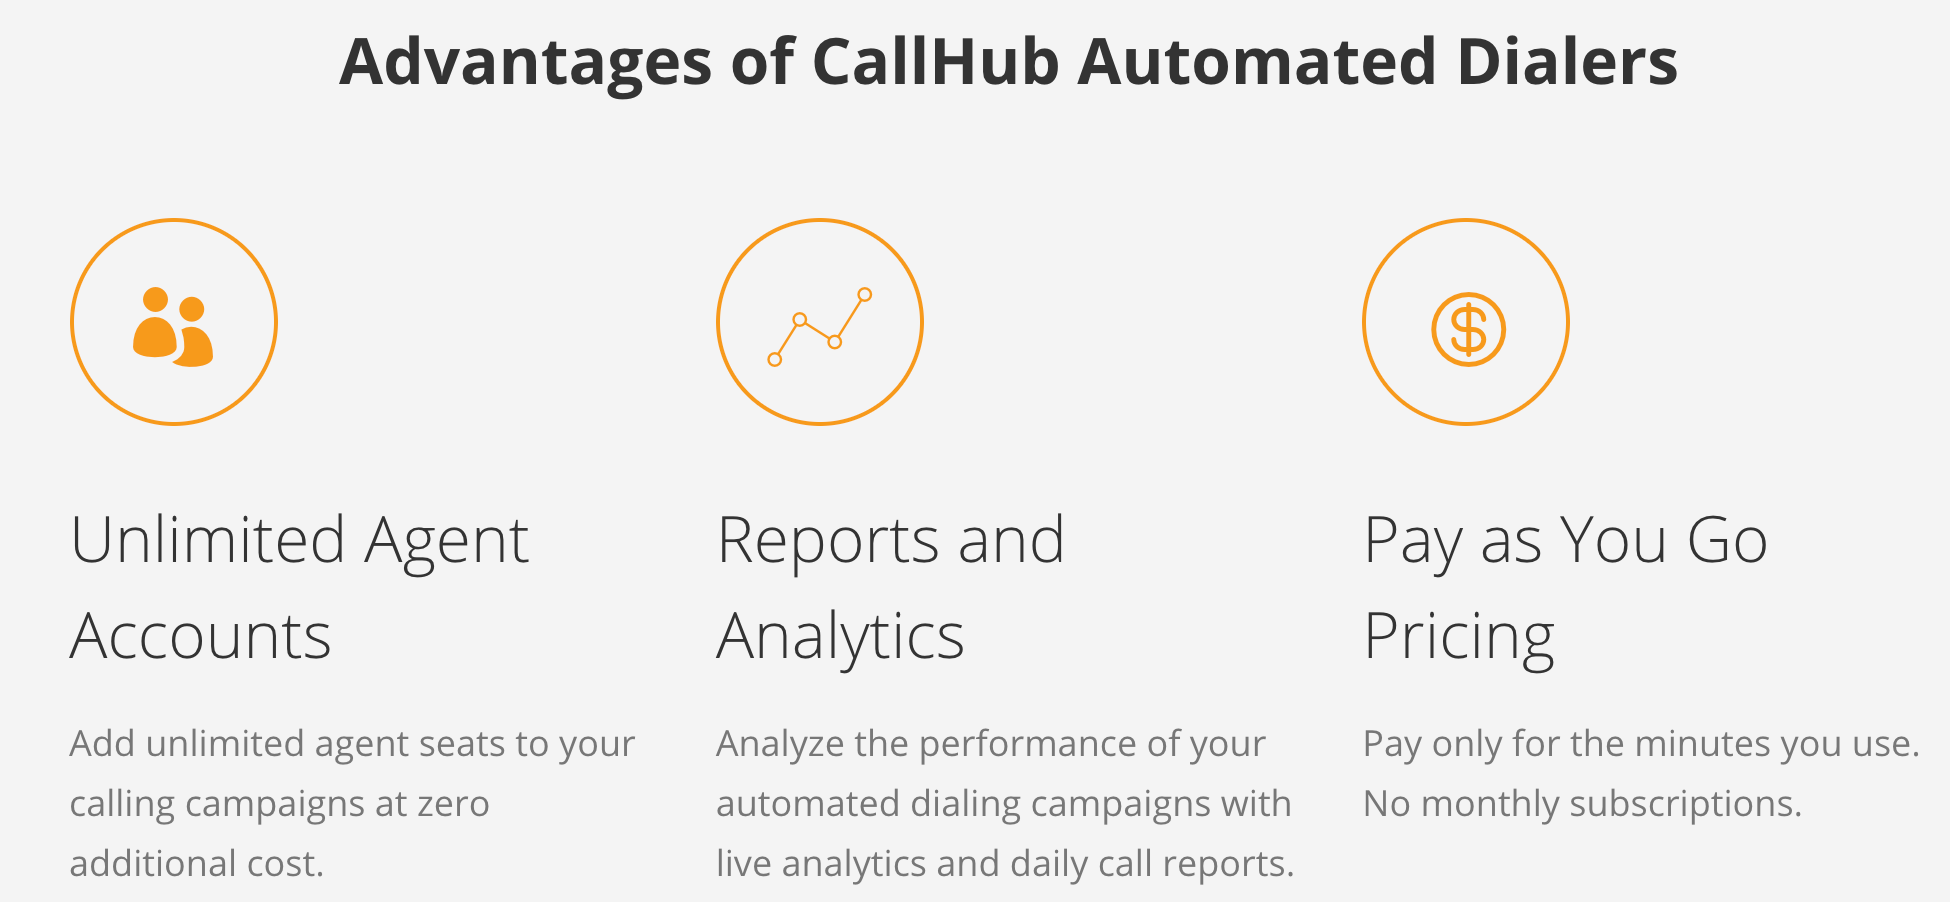 CallHub key advantages chart, includes unlimited agent accounts, reports and analytics, and pay as you go pricing.